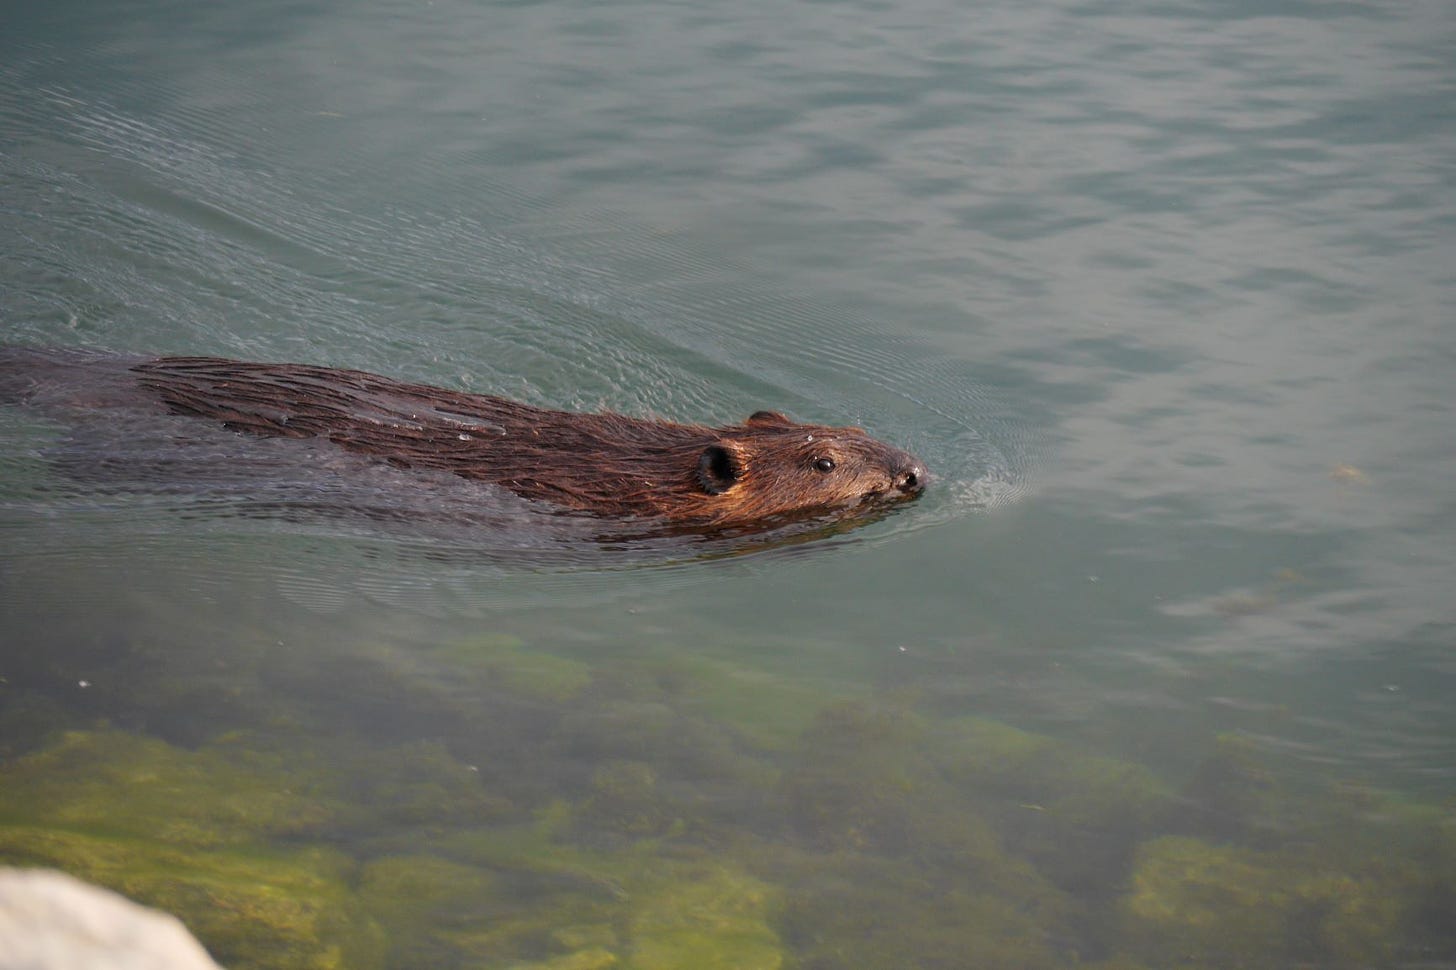 A beaver swims past, their nose, eyes and ears poking out of the water.